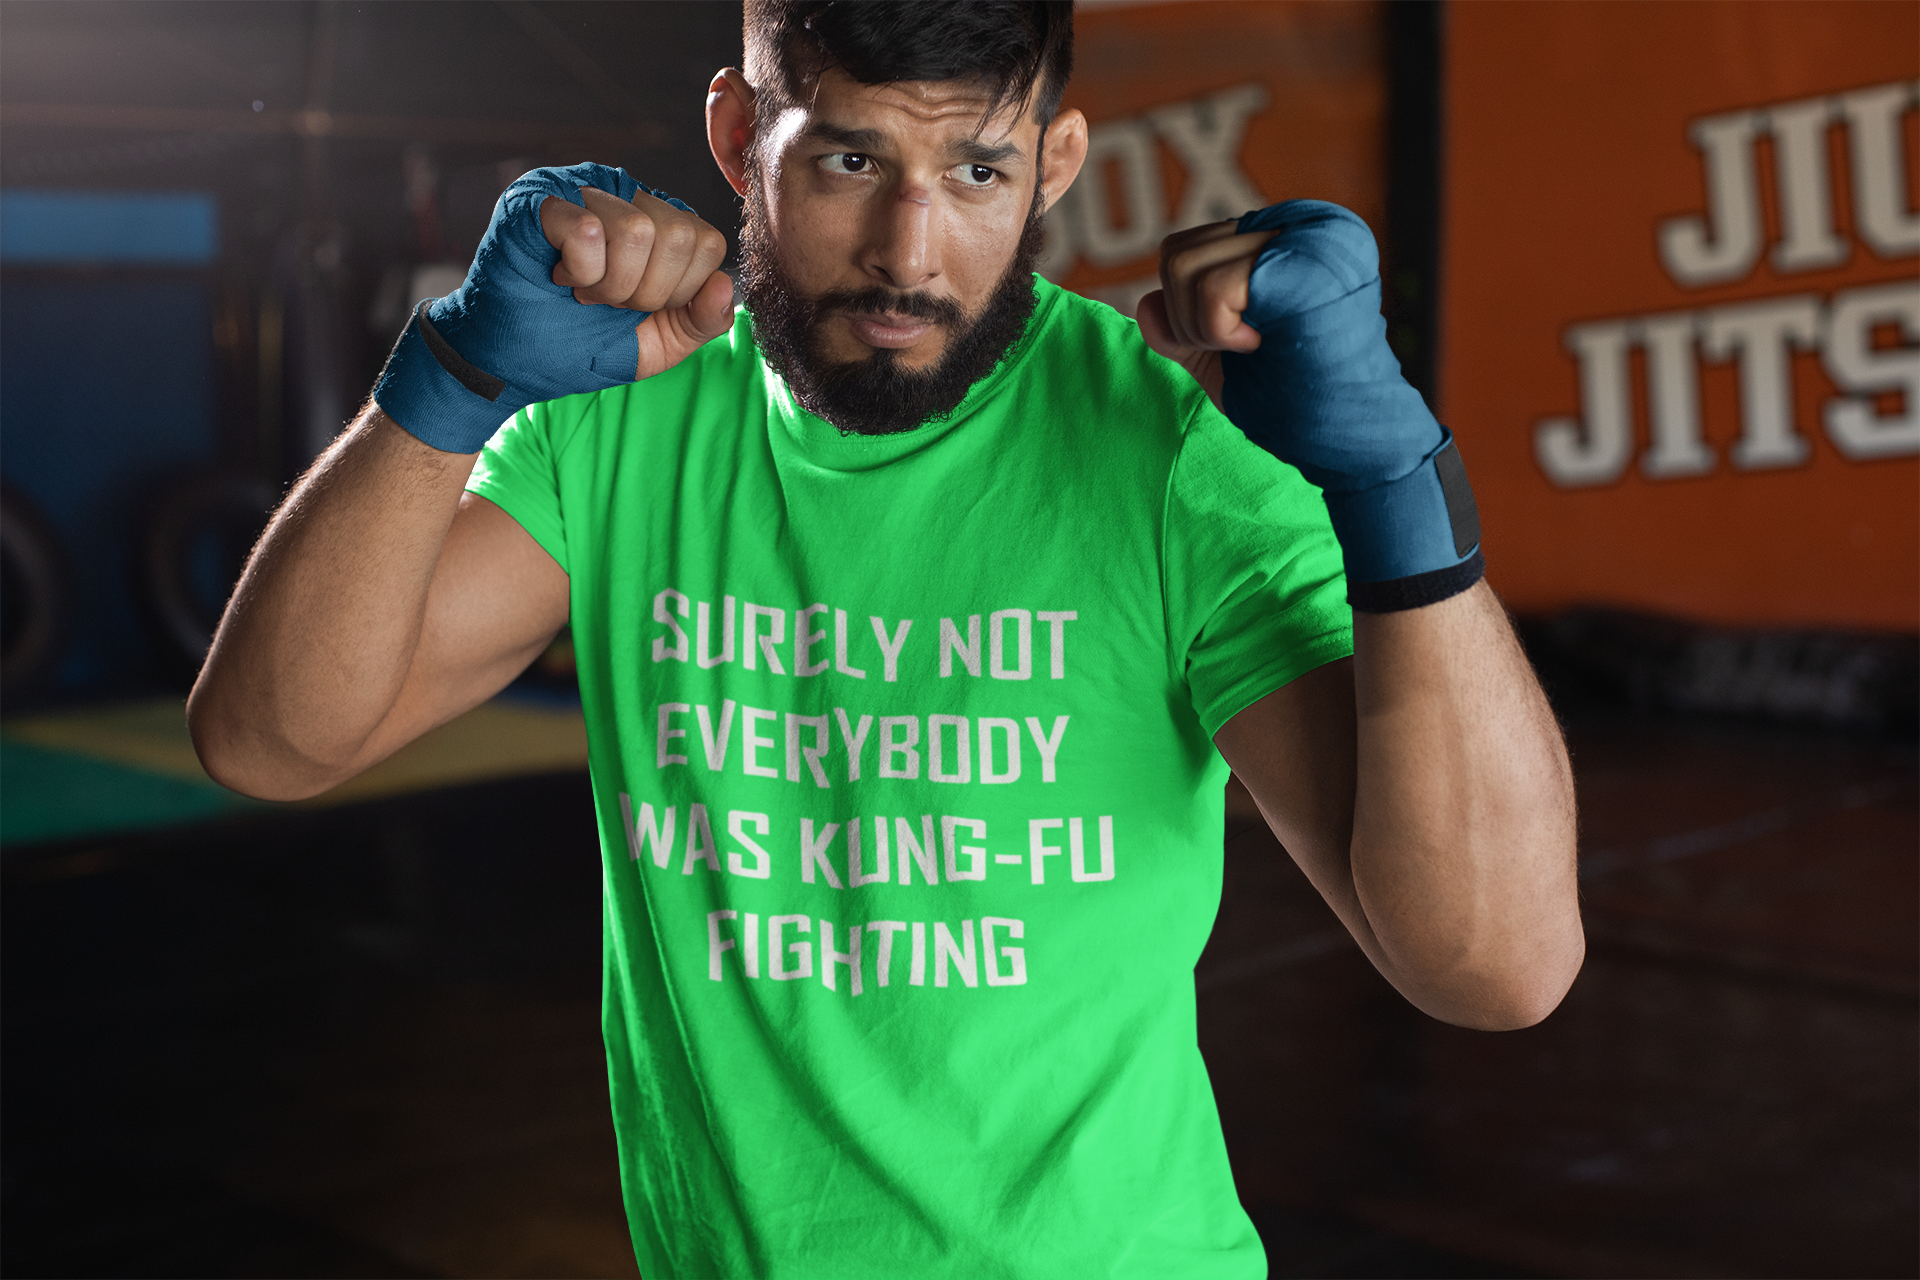 Surely Not Everybody Was Kung-Fu Fighting  Mens T-shirt